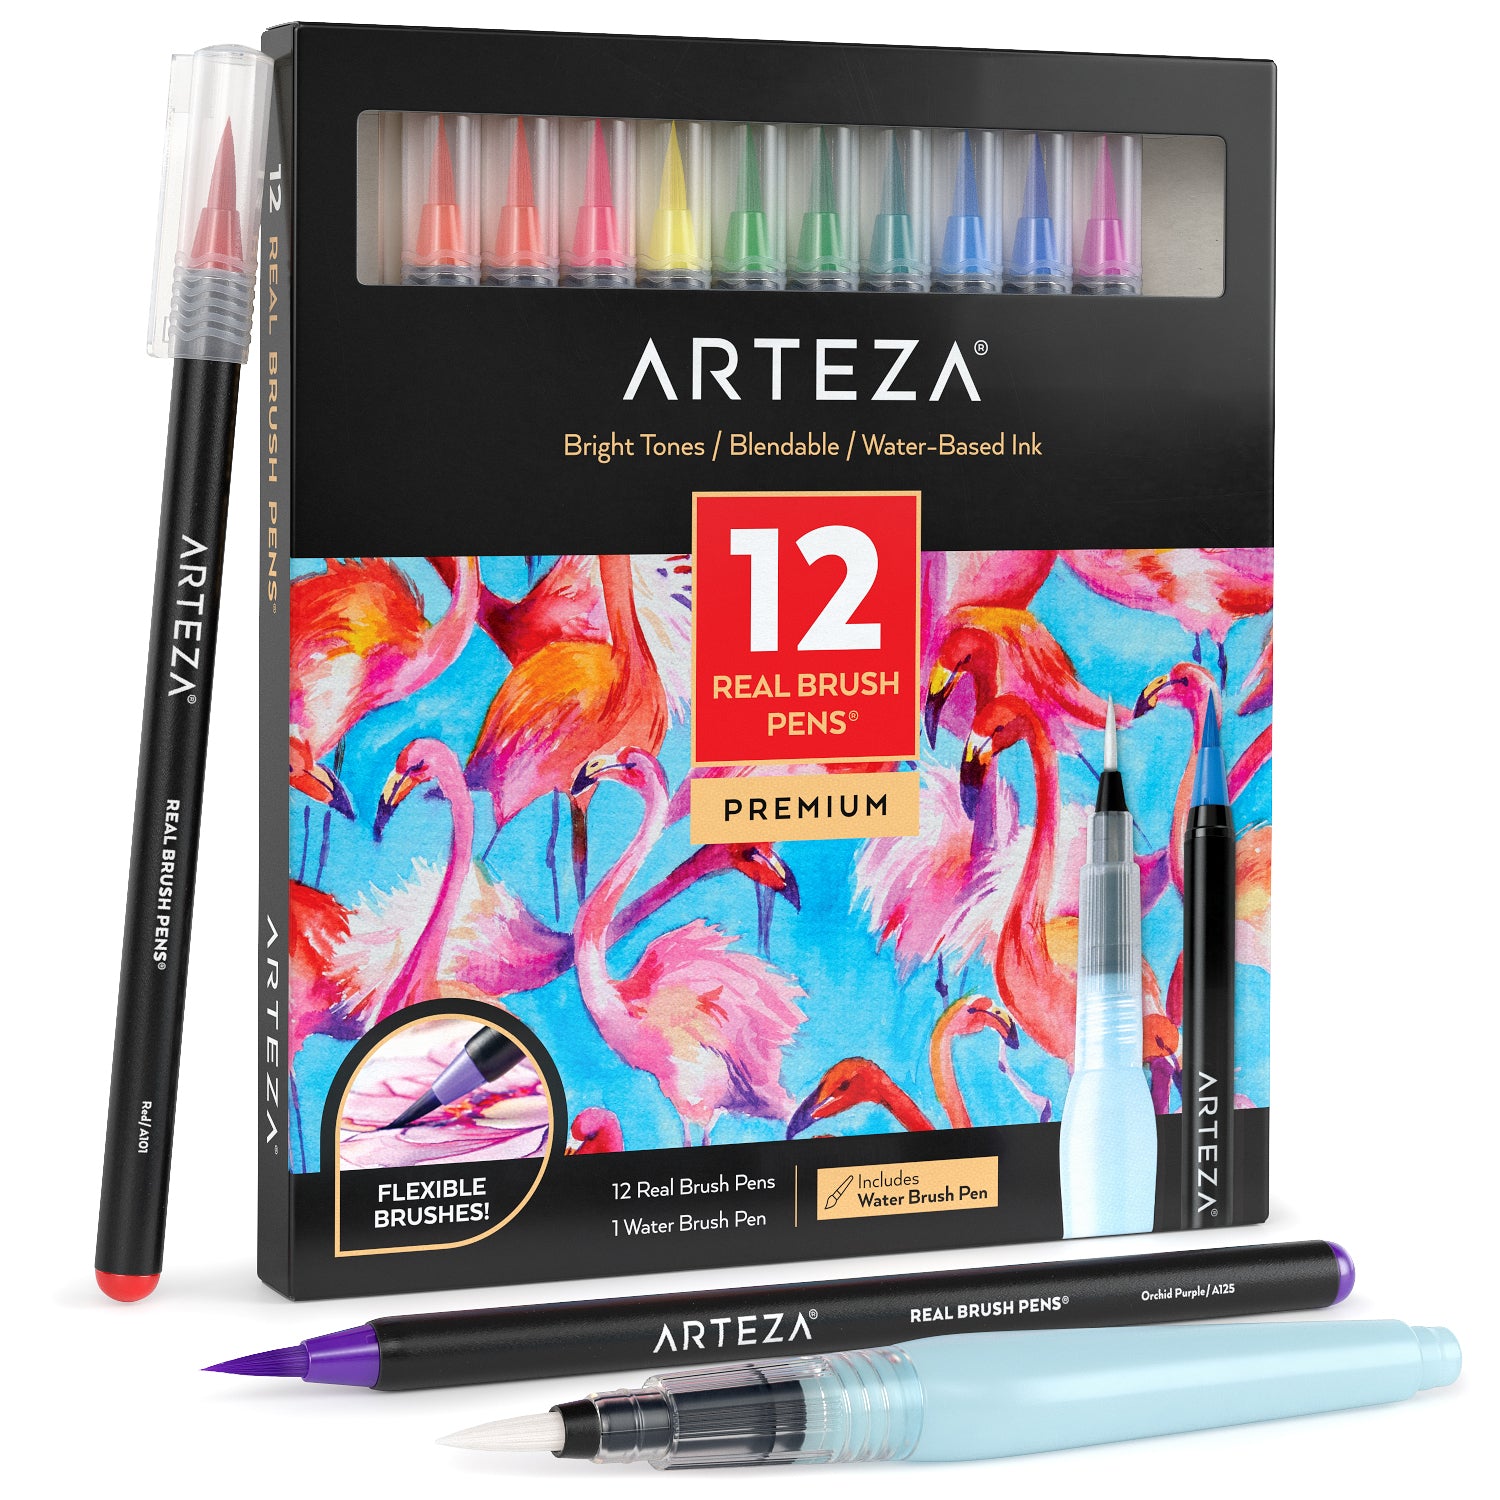 Arteza Watercolors, Fineliners + Real Brush Pen Review · Bright